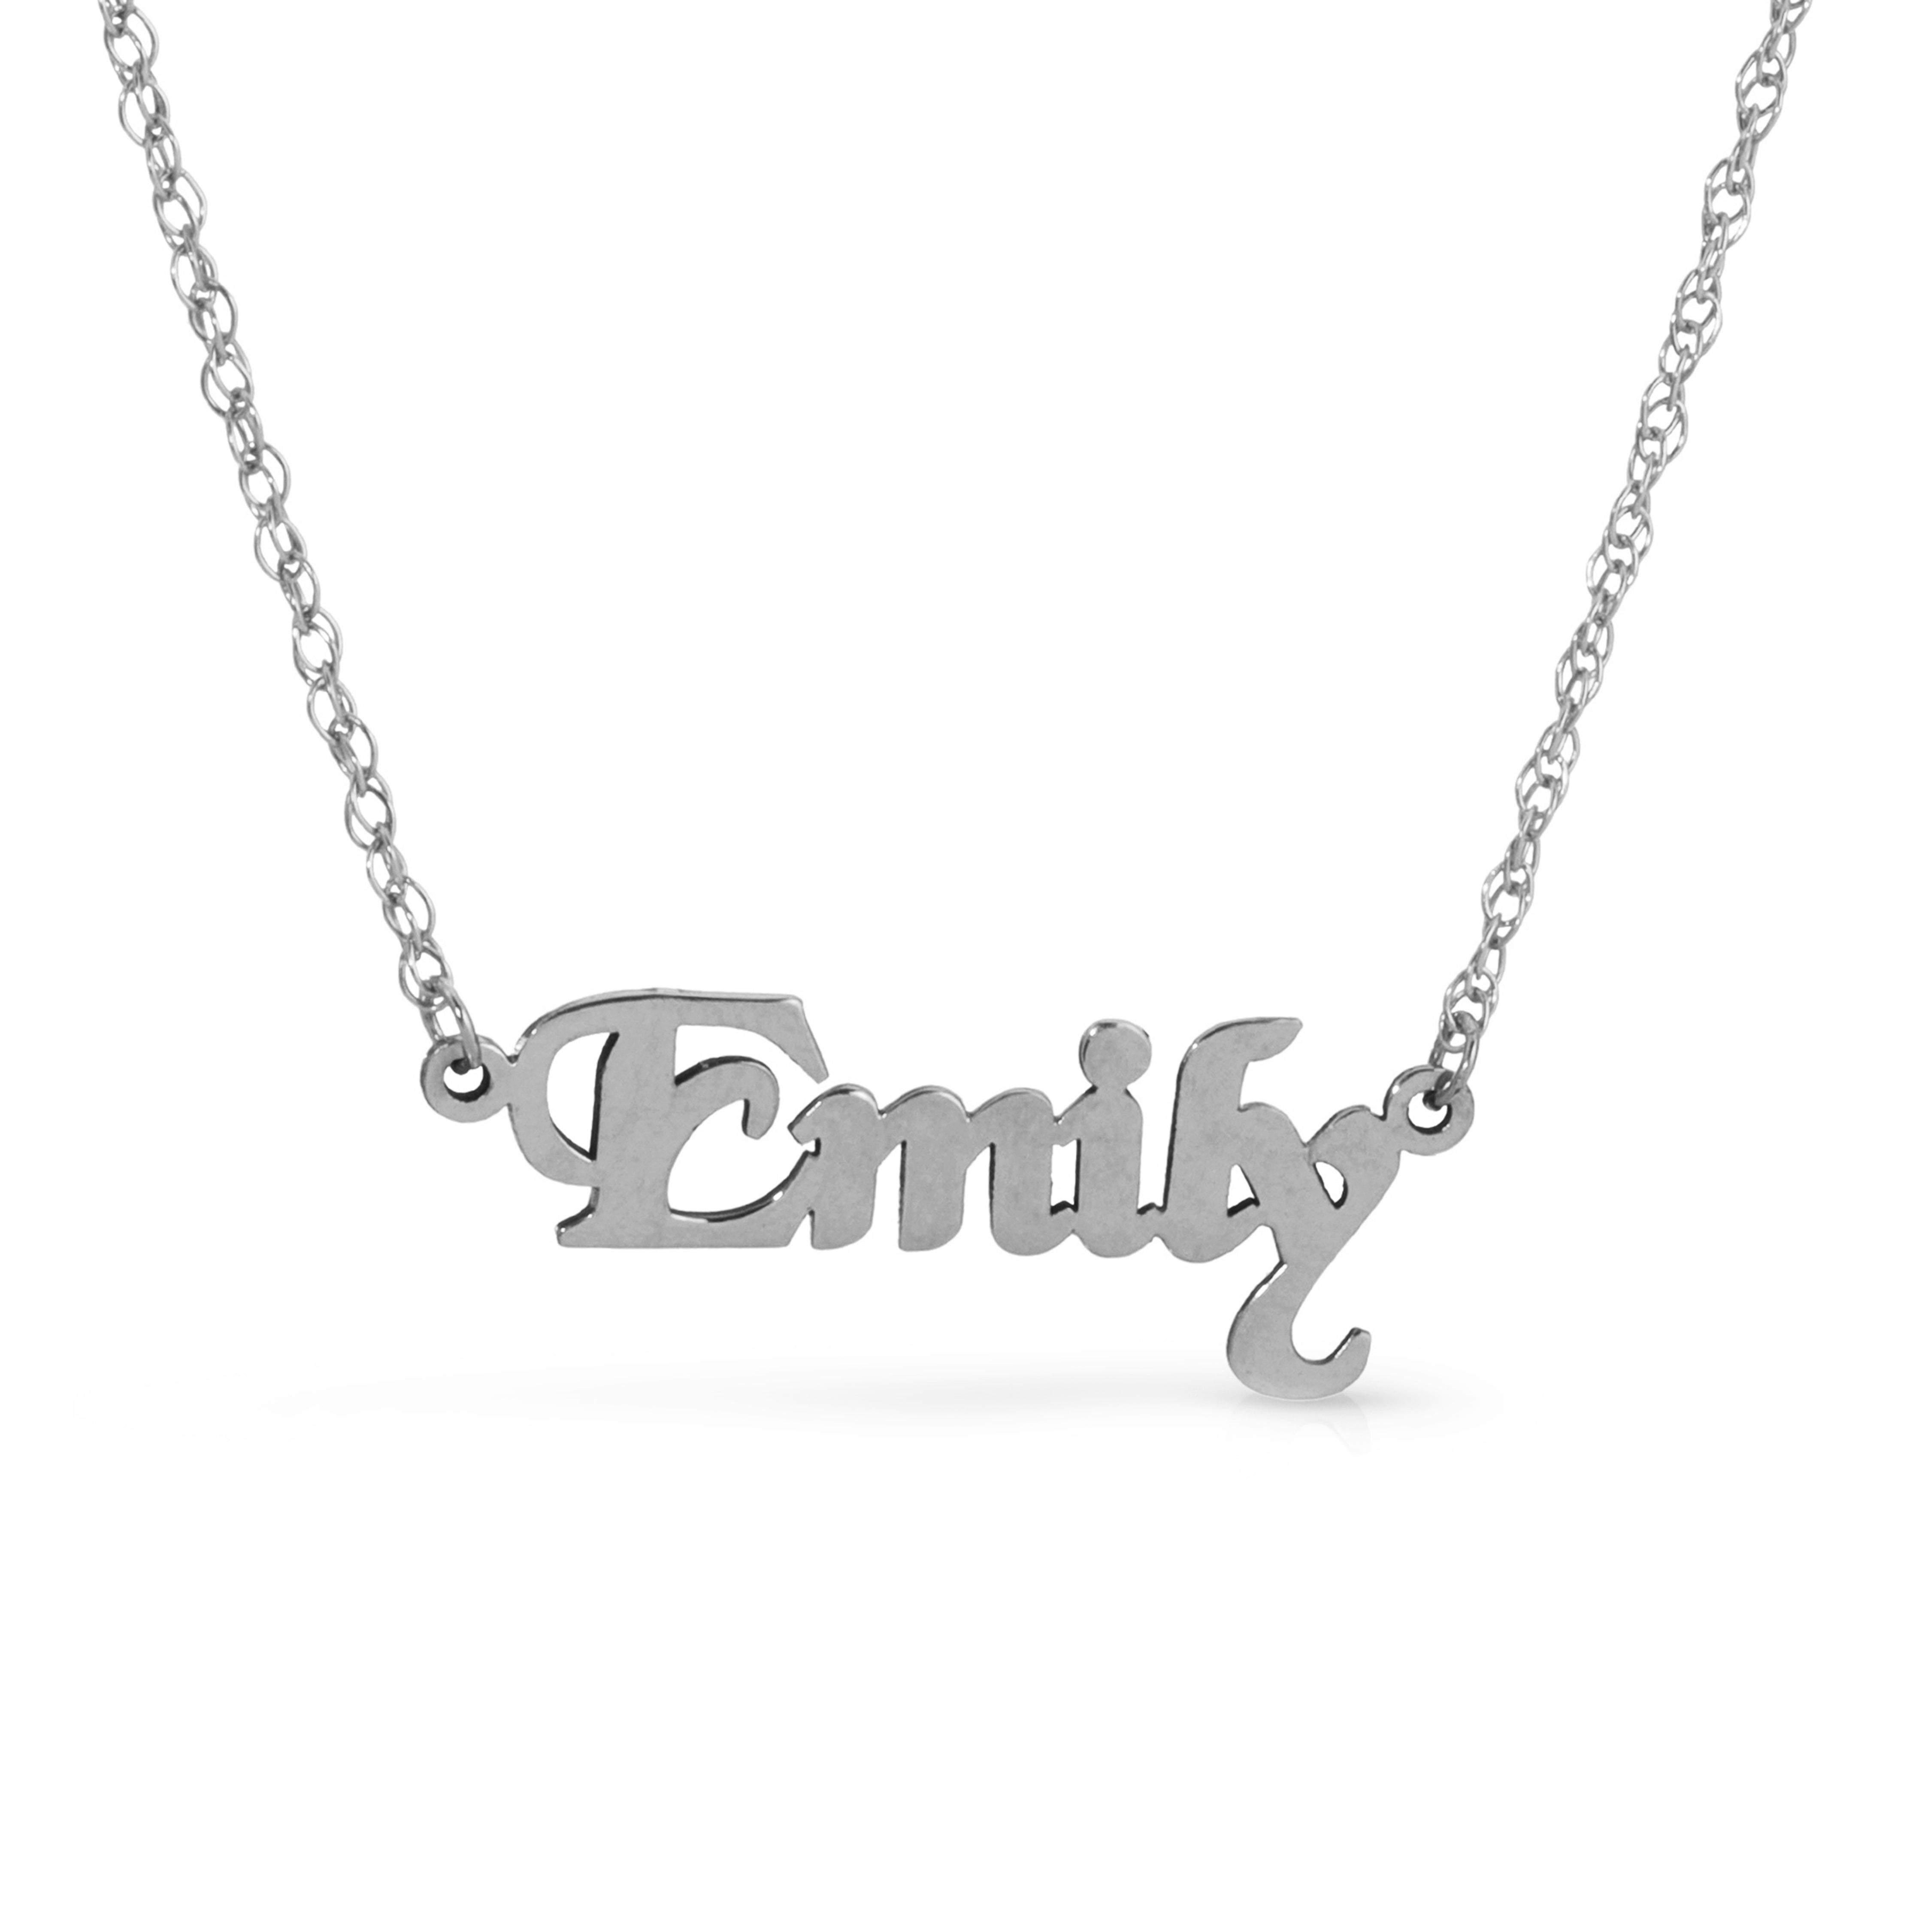 Copy of Customized name Necklace in 14k Solid Gold Plate -18 inch rope chain 1.15mm